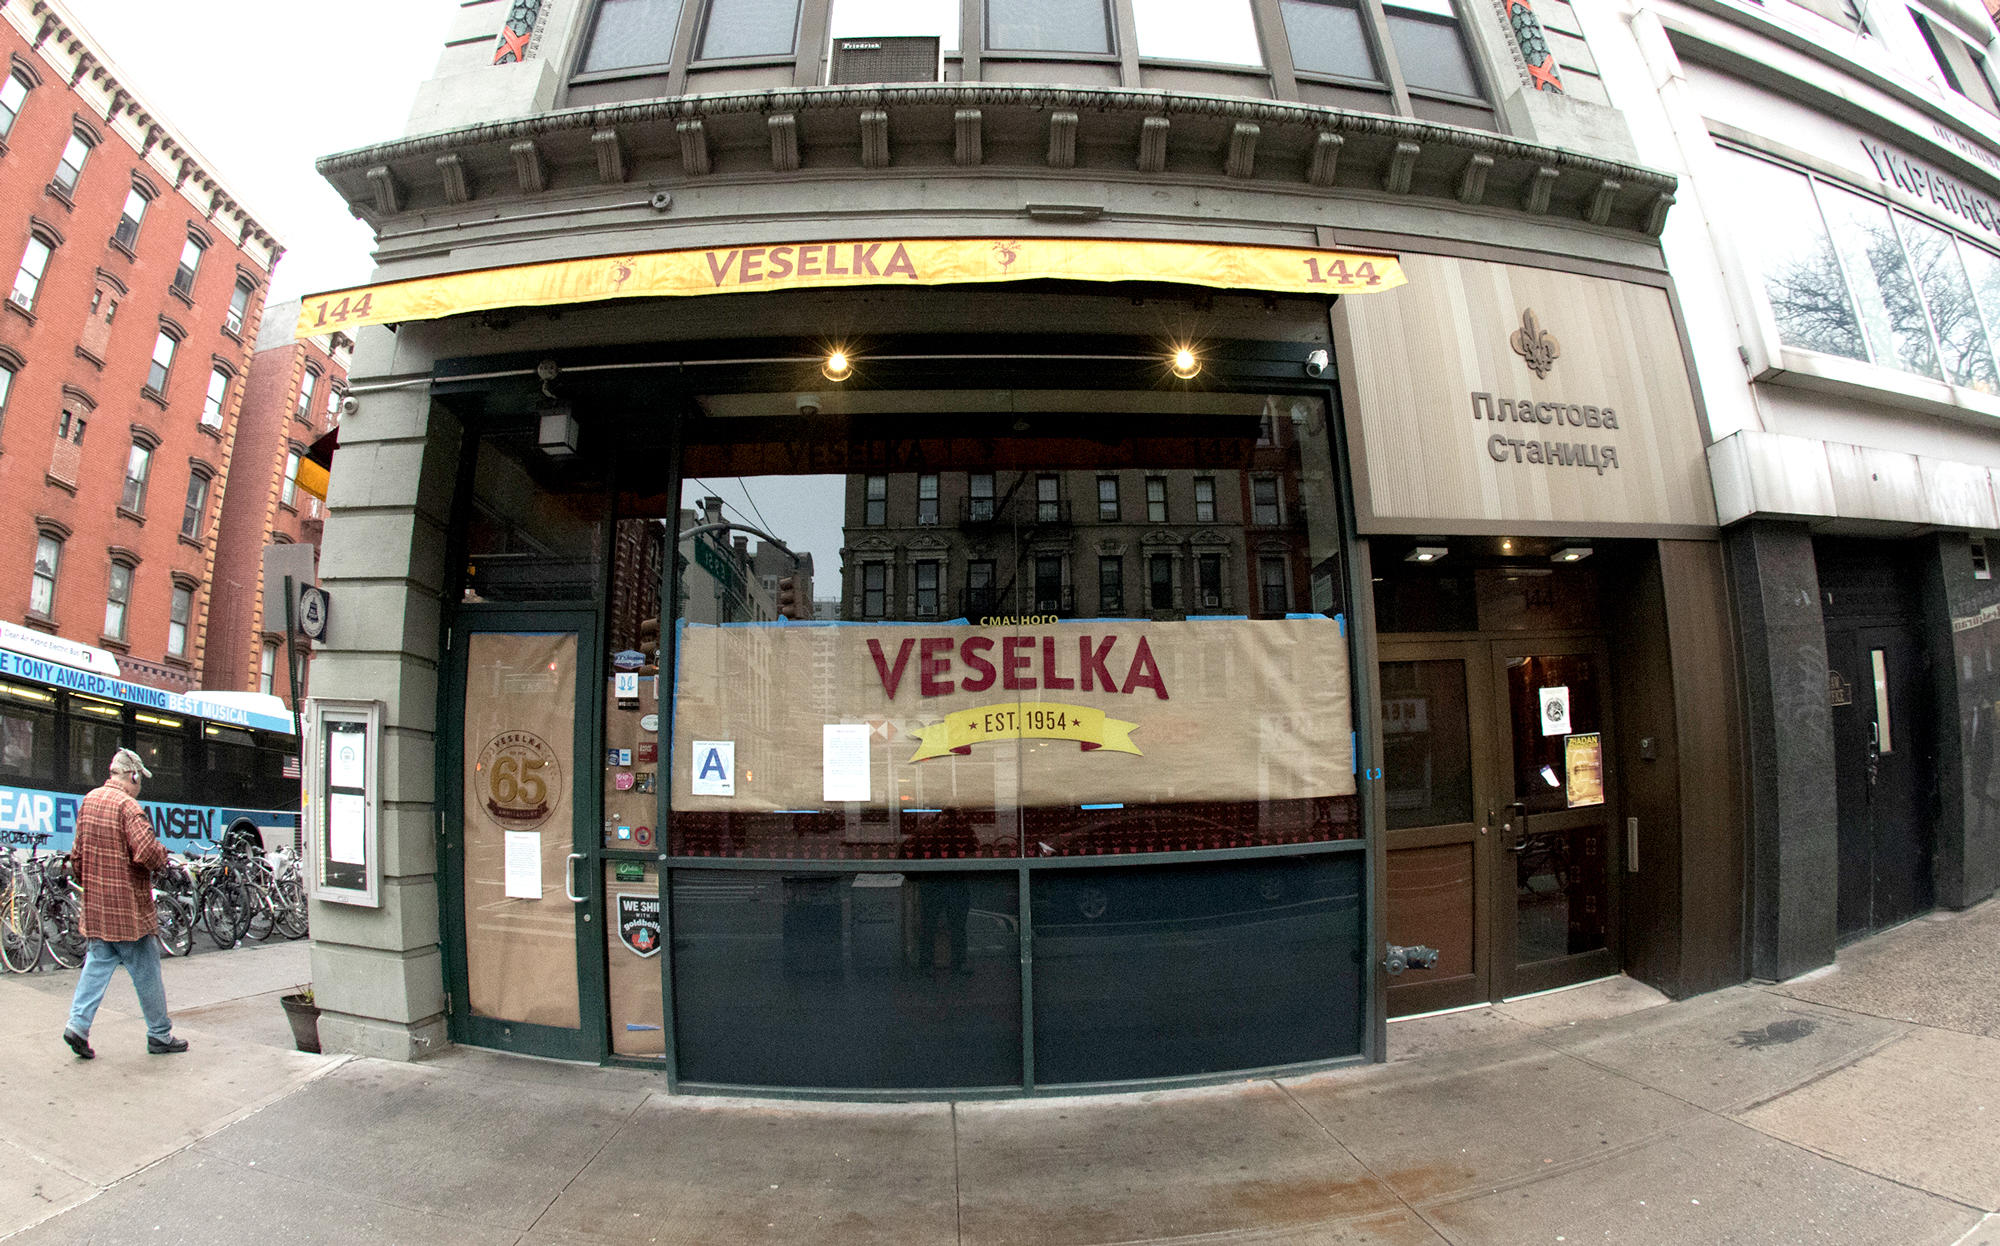 In New York City, Veselka closed due to the coronavirus COVID-19 pandemic. (Photo by Bill Tompkins/Getty Images)